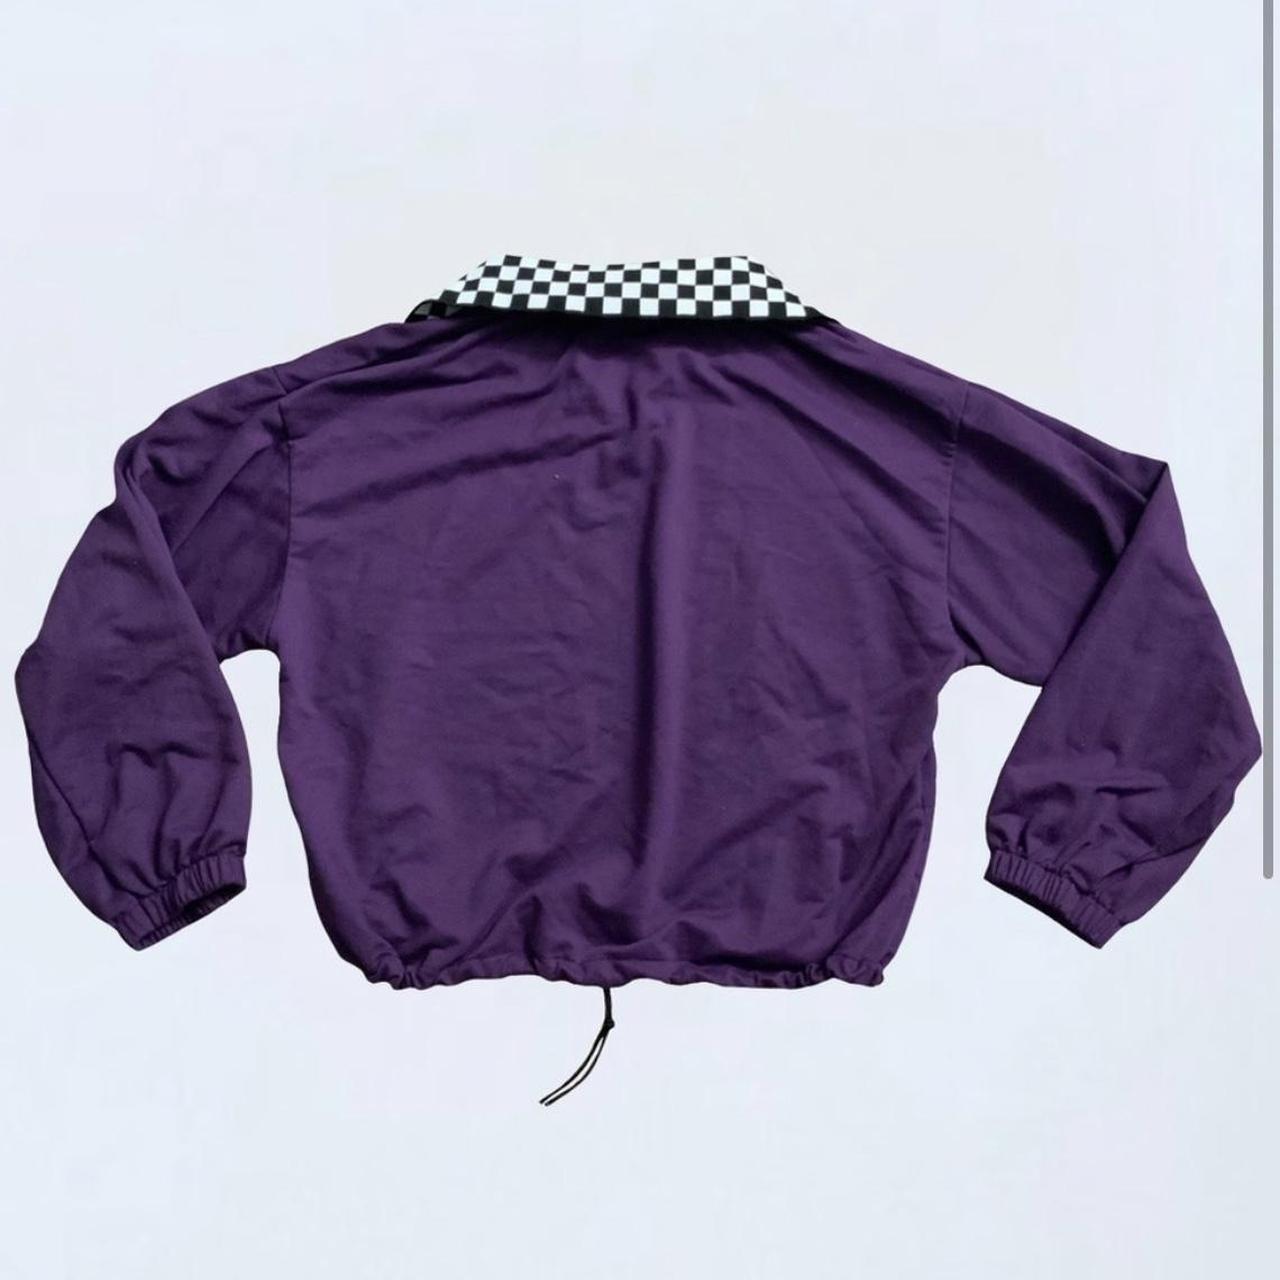 Product Image 3 - Checkered purple sweater from Yesstyle
One